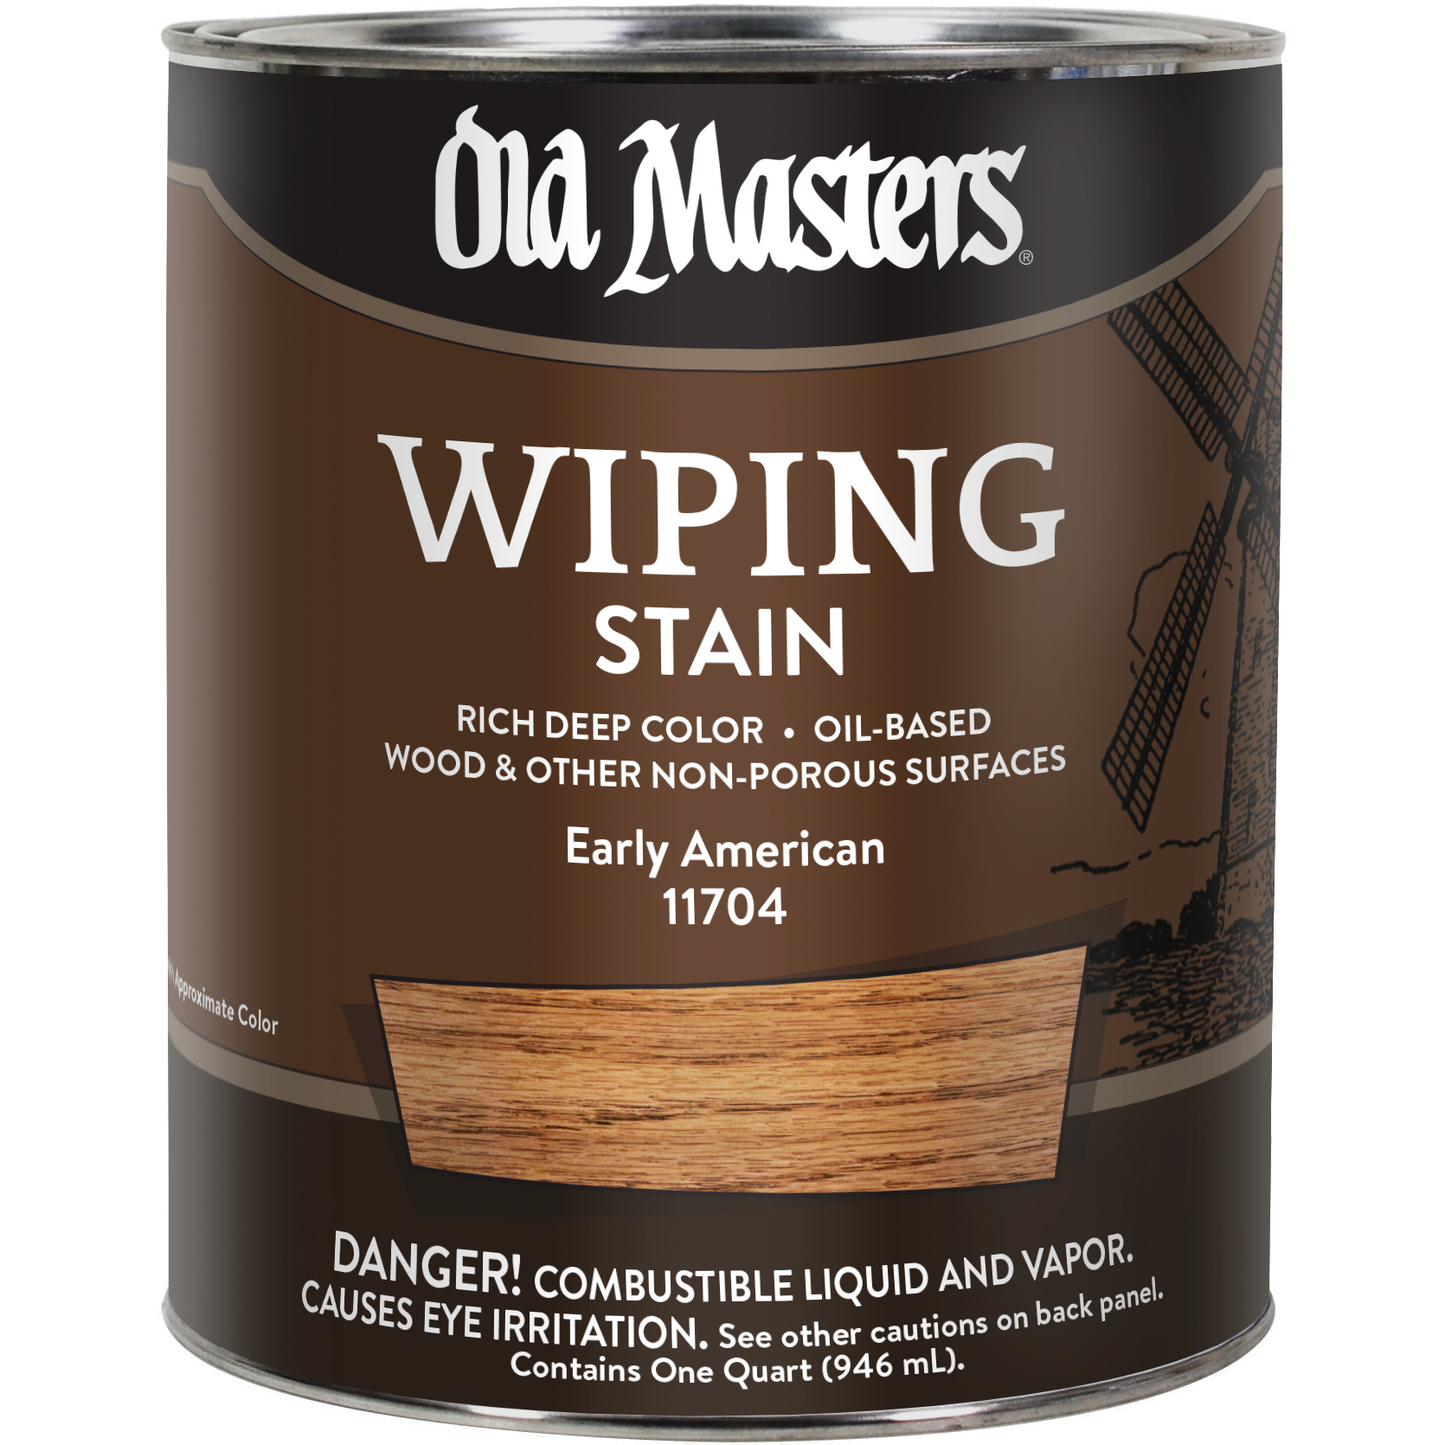 Old Masters Wiping Stain - Early American